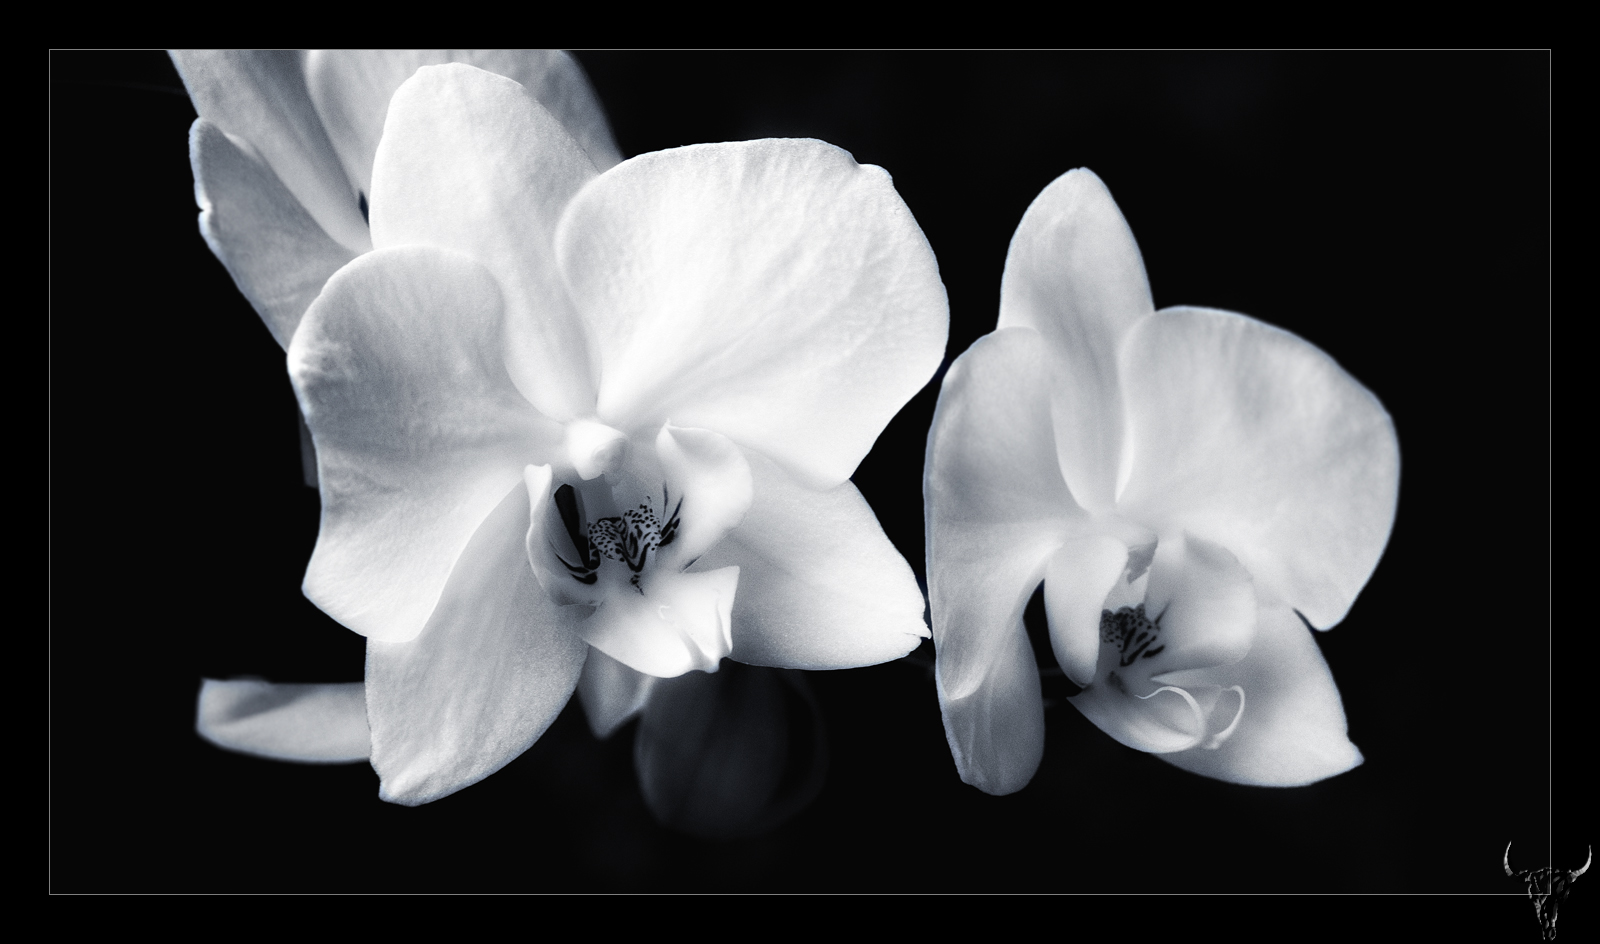 Just orchids